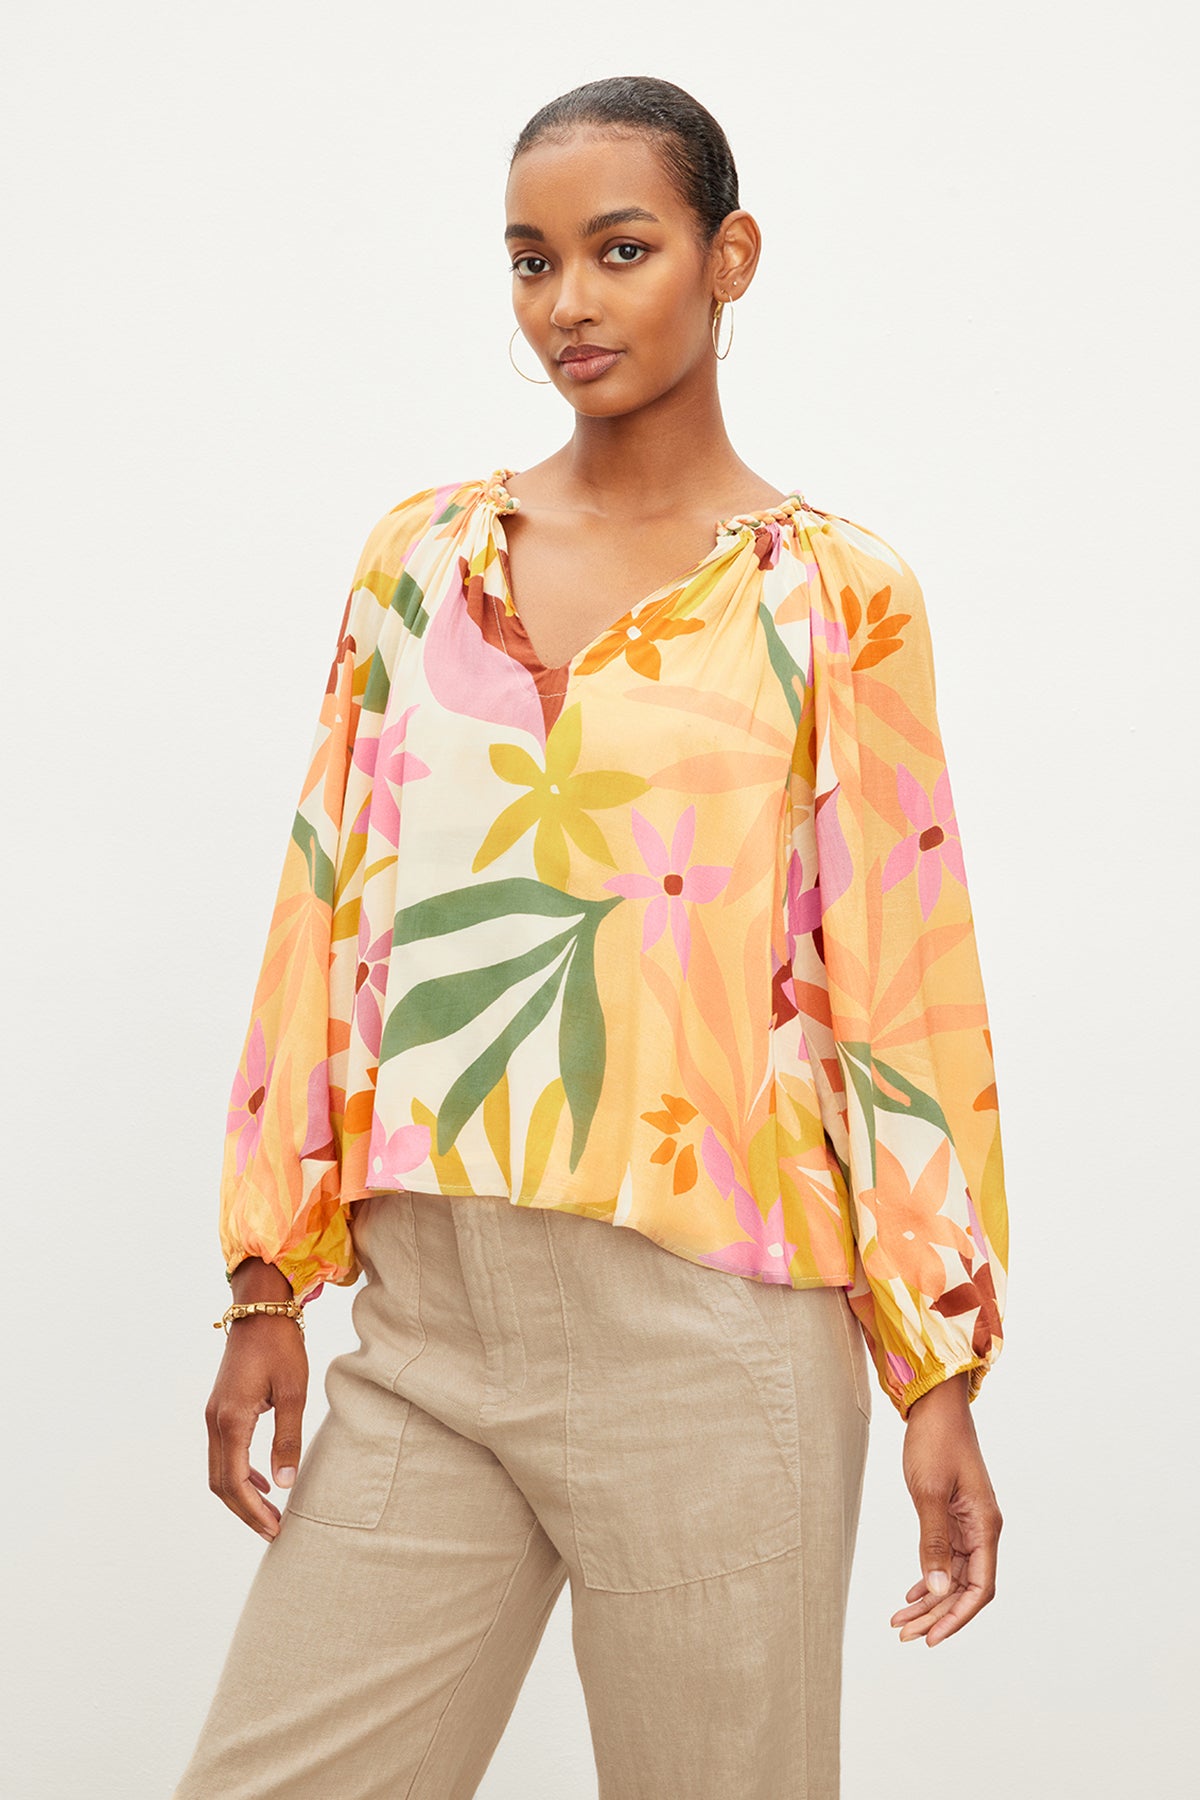   A model wearing the Velvet by Graham & Spencer DION PRINTED BOHO TOP with a tropical print and v-neckline. 